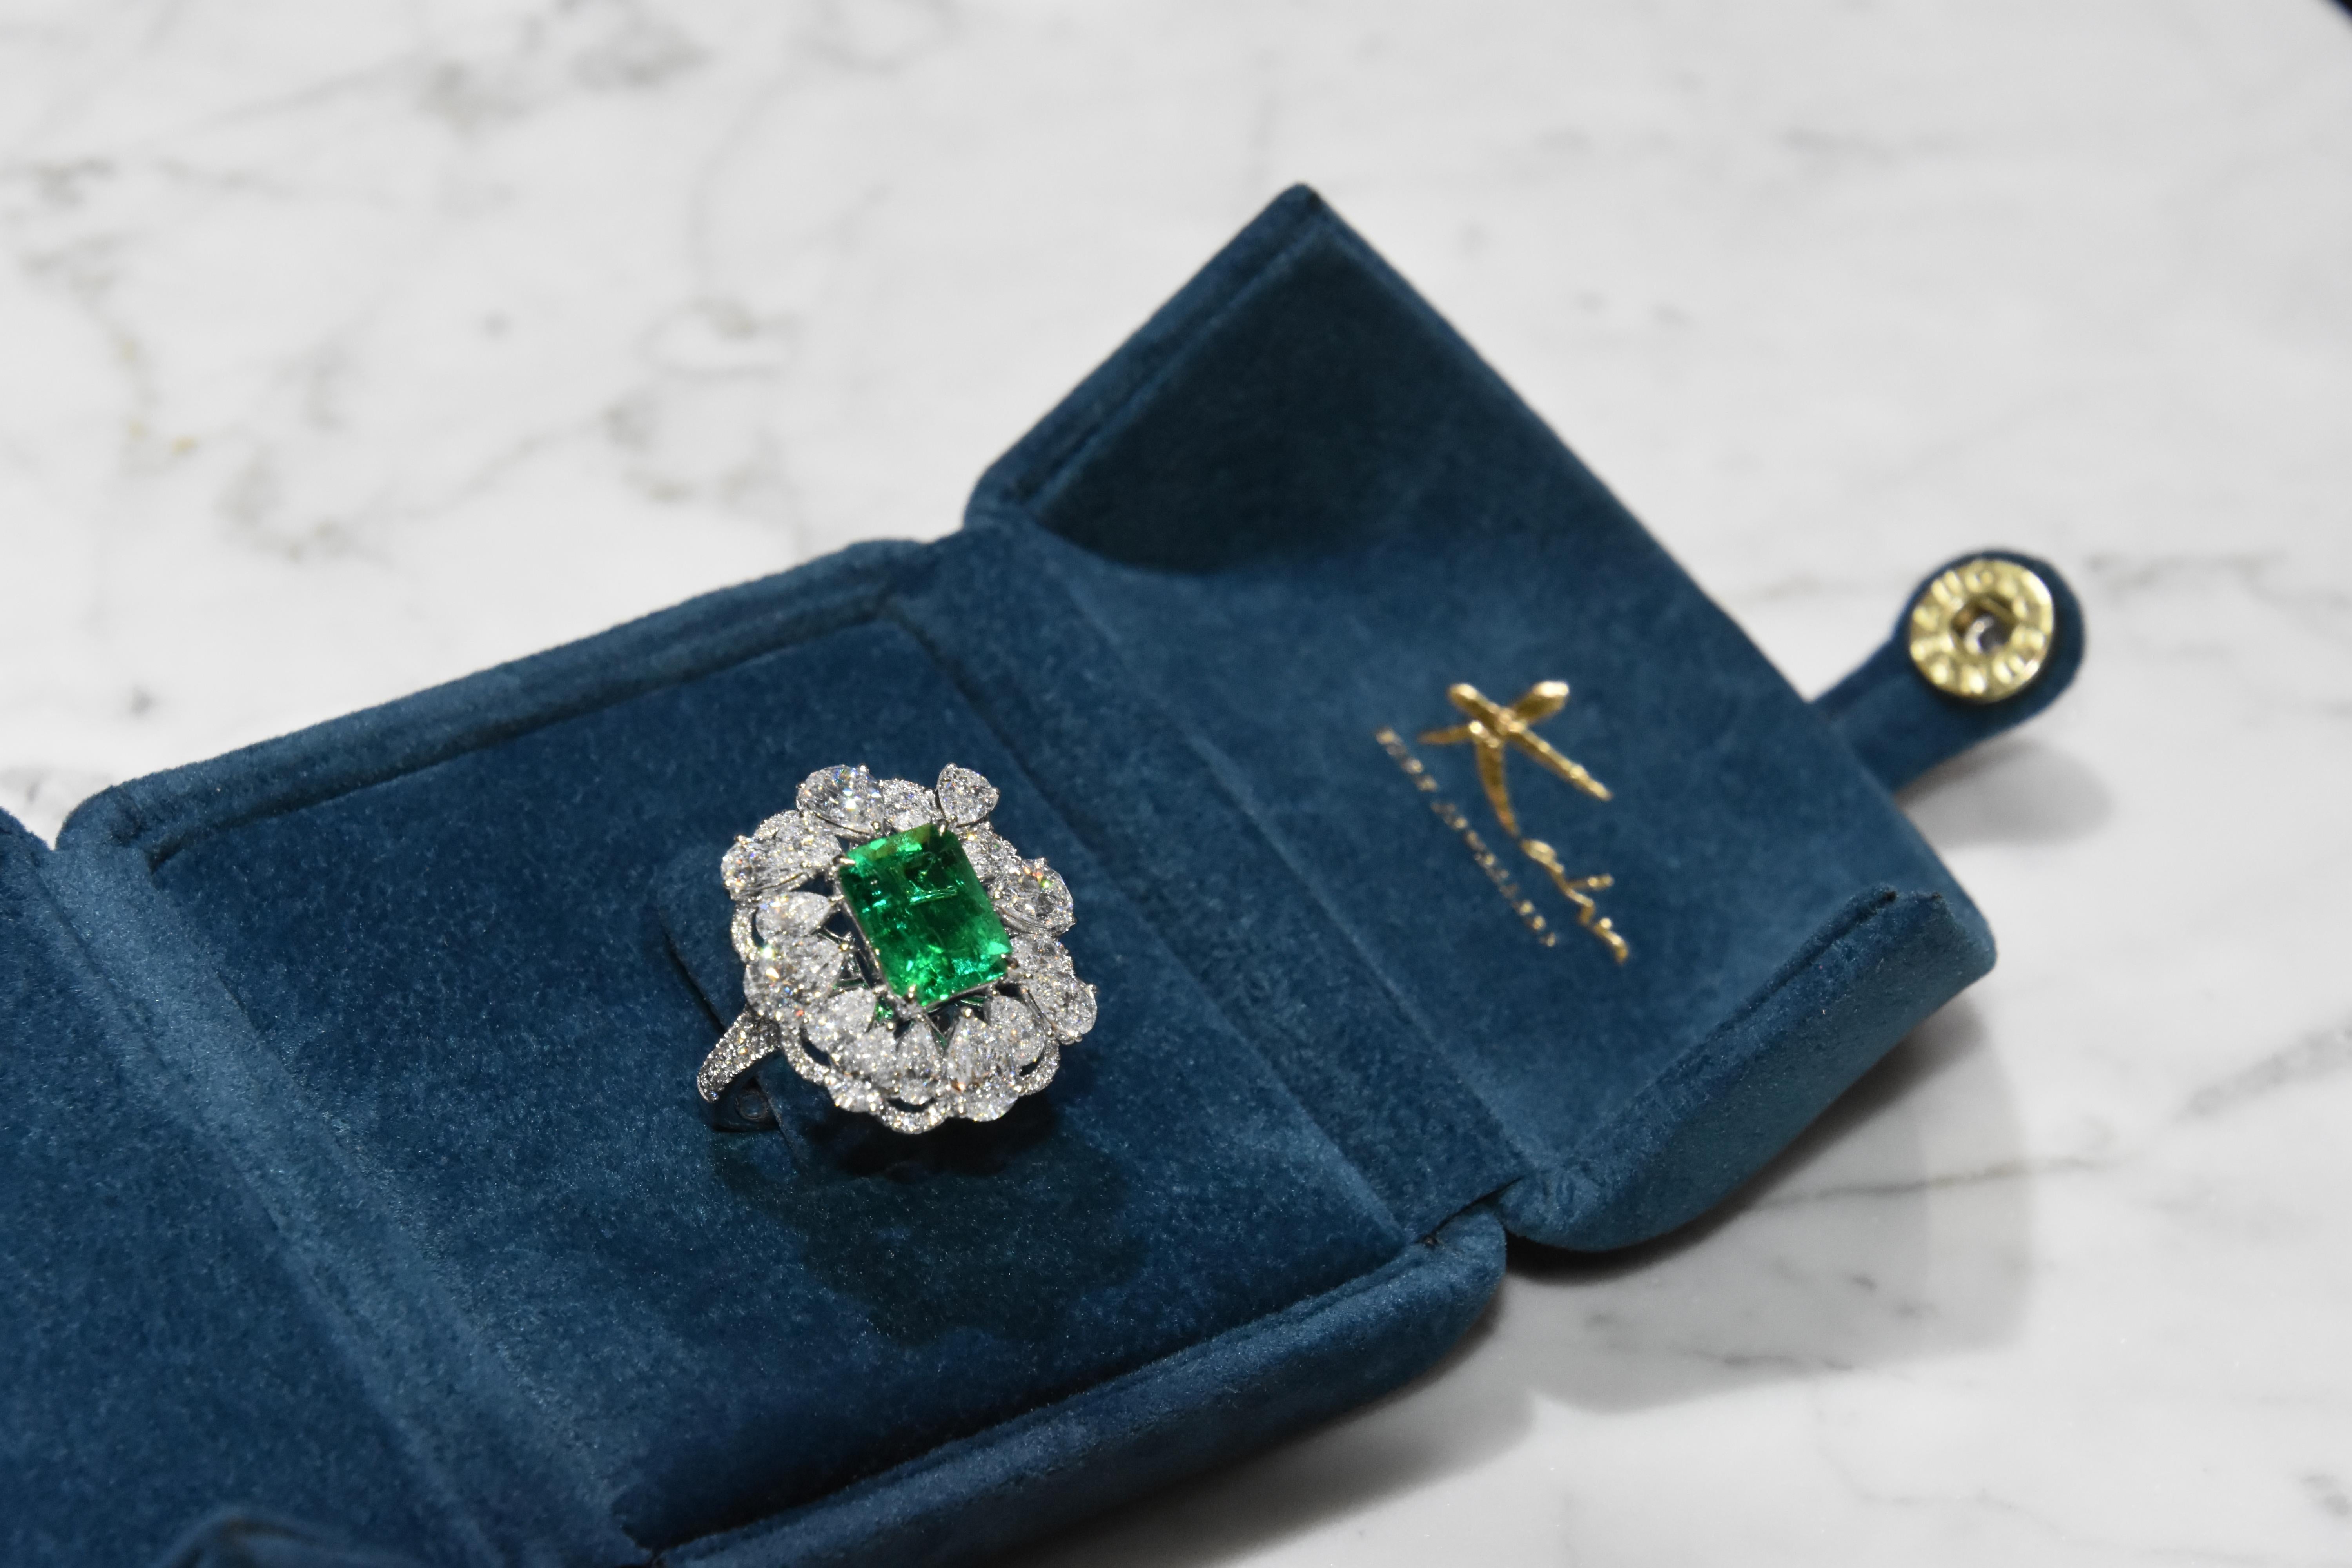 This ring present a 2.48 carat emerald shape Colombia emerald with white diamond in pear and round,  finished in white gold. 

This emerald is from the Muzo region of Columbia, which is famed for producing the finest emeralds. Muzo emerald -